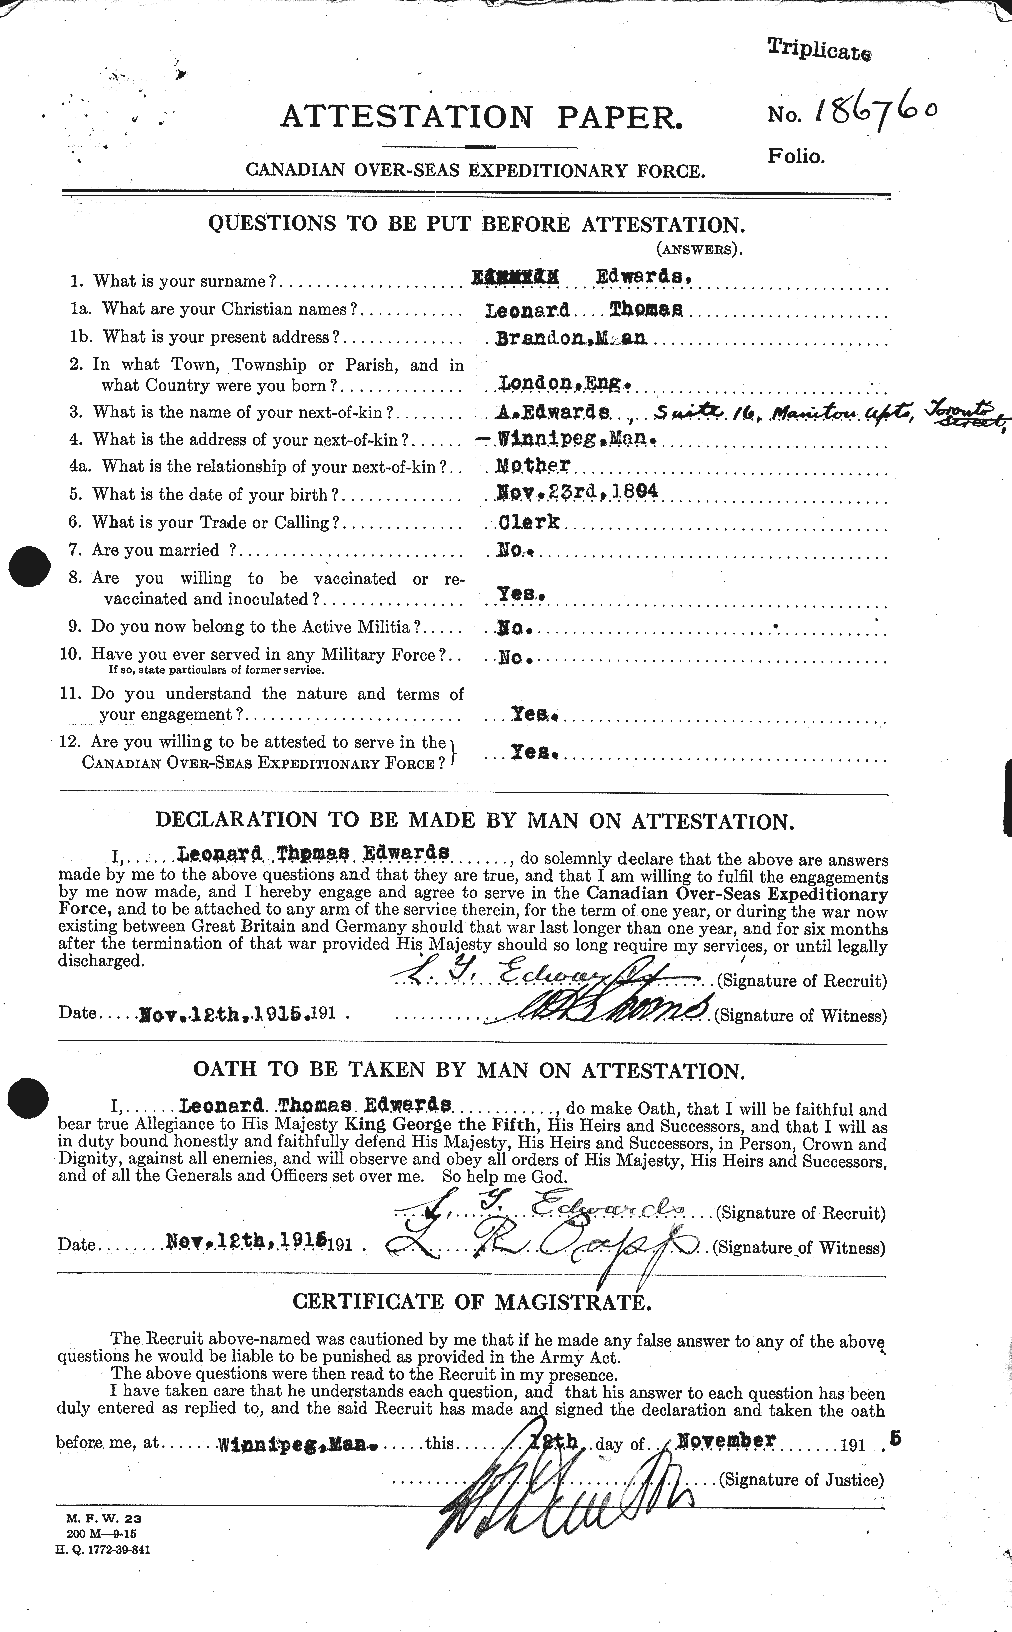 Personnel Records of the First World War - CEF 310197a